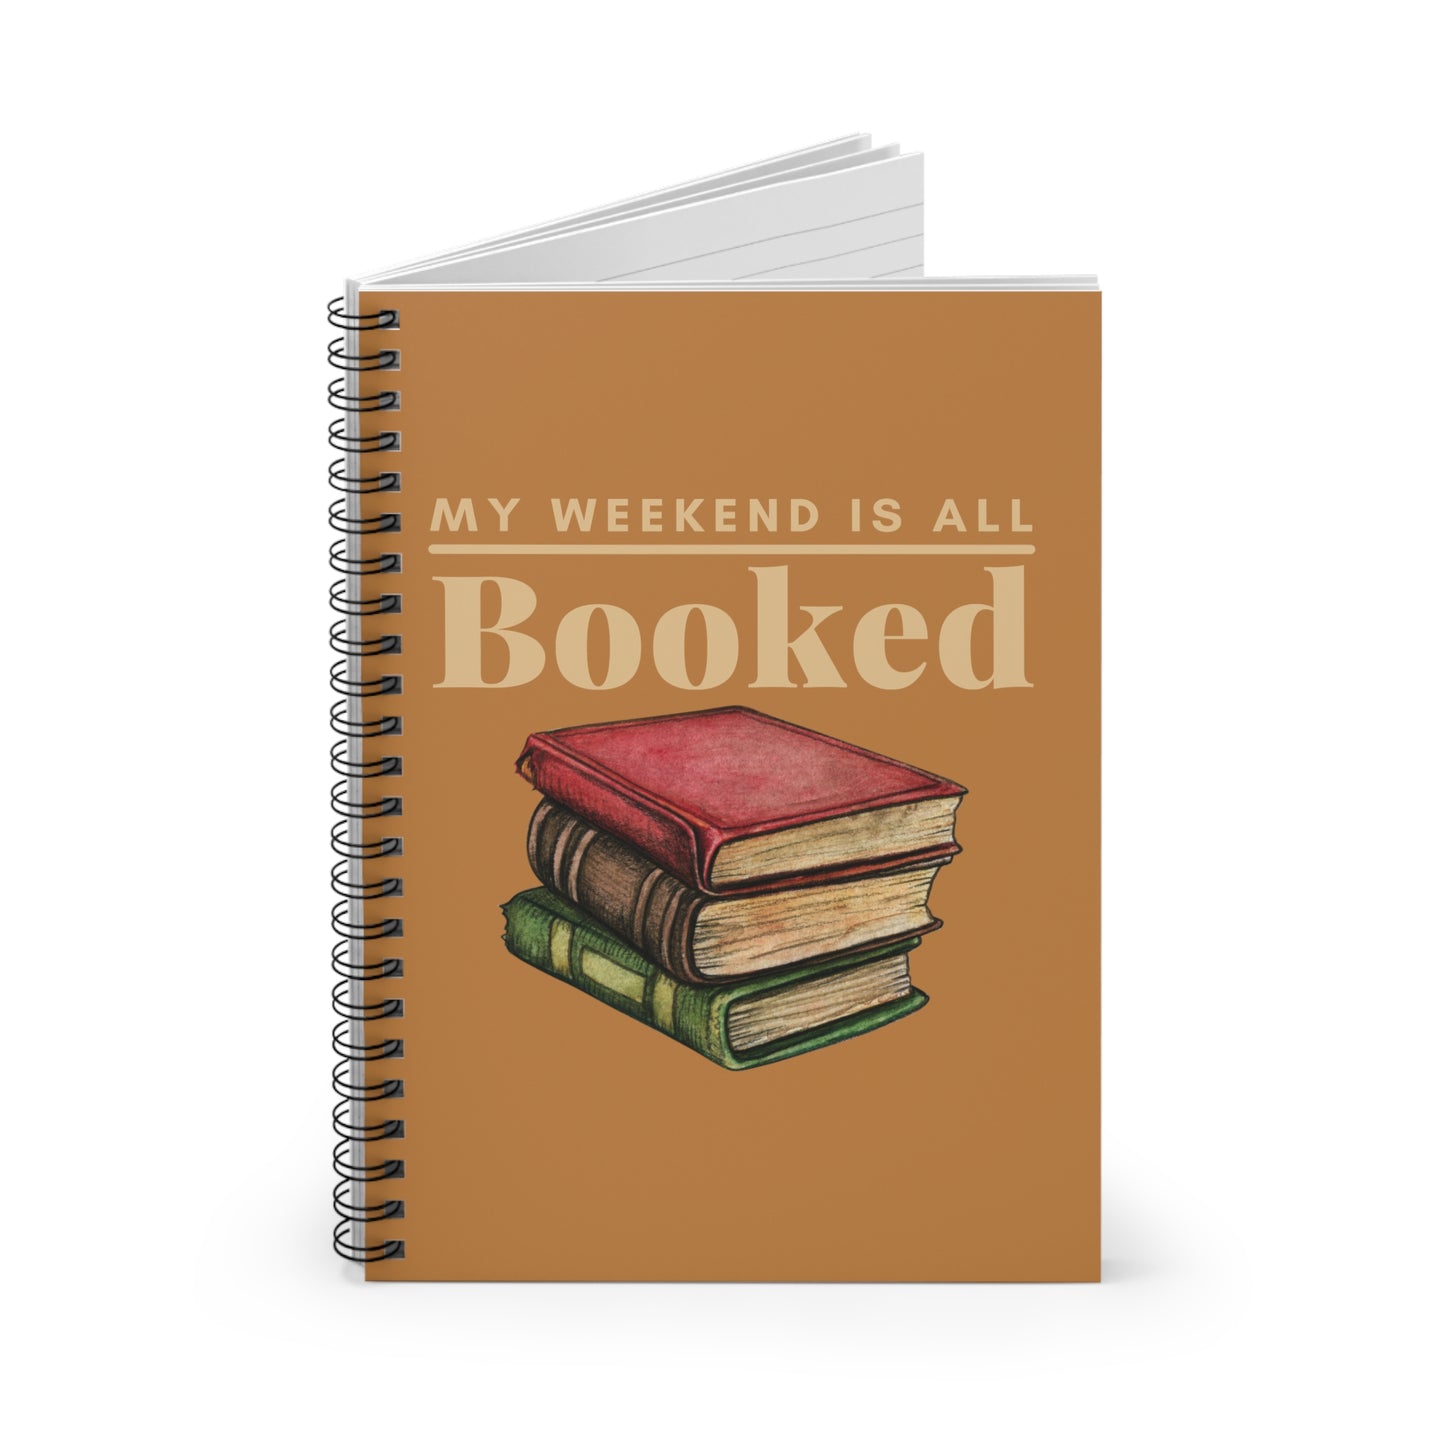 My Weekend is all Booked Spiral Notebook - Ruled Line